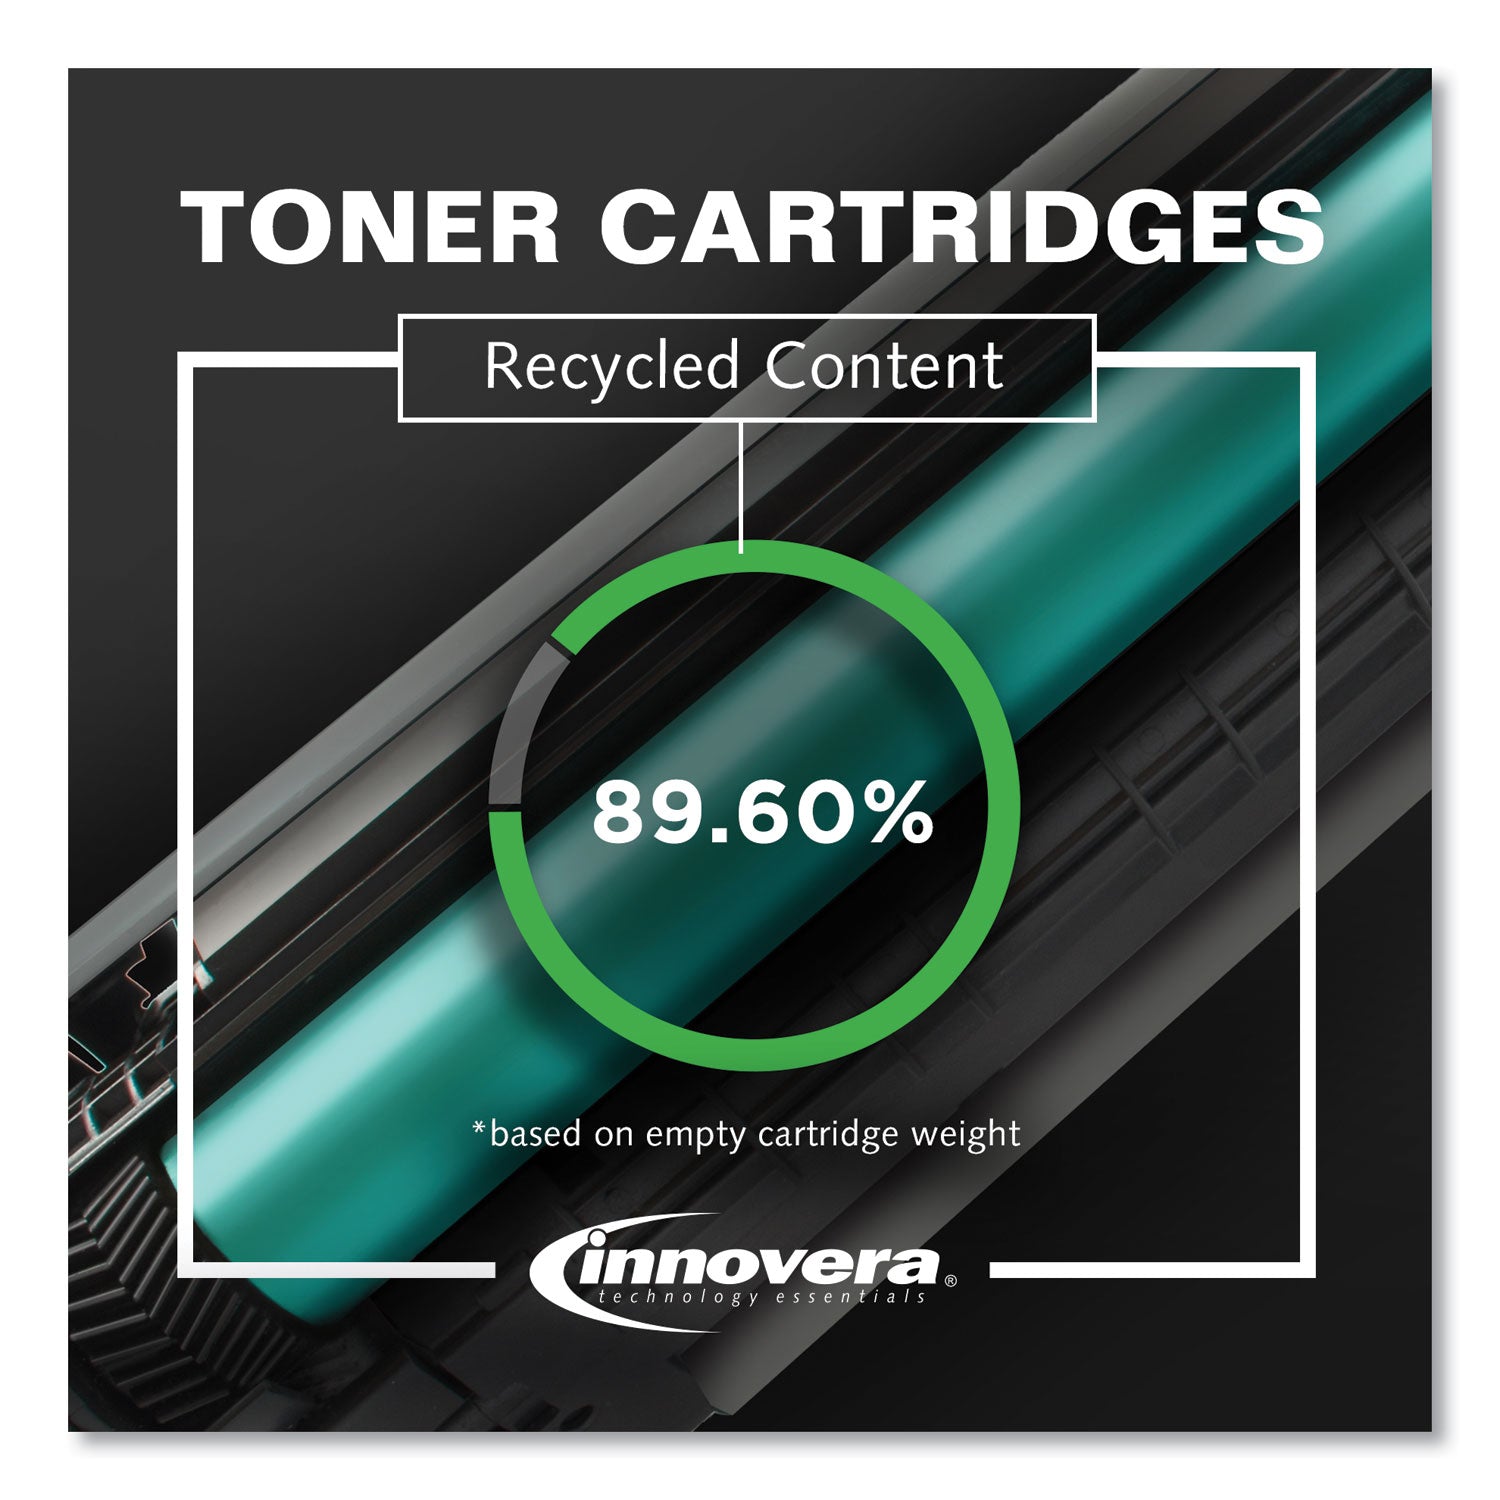 Remanufactured Black Toner, Replacement for TN720, 3,000 Page-Yield, Ships in 1-3 Business Days - 